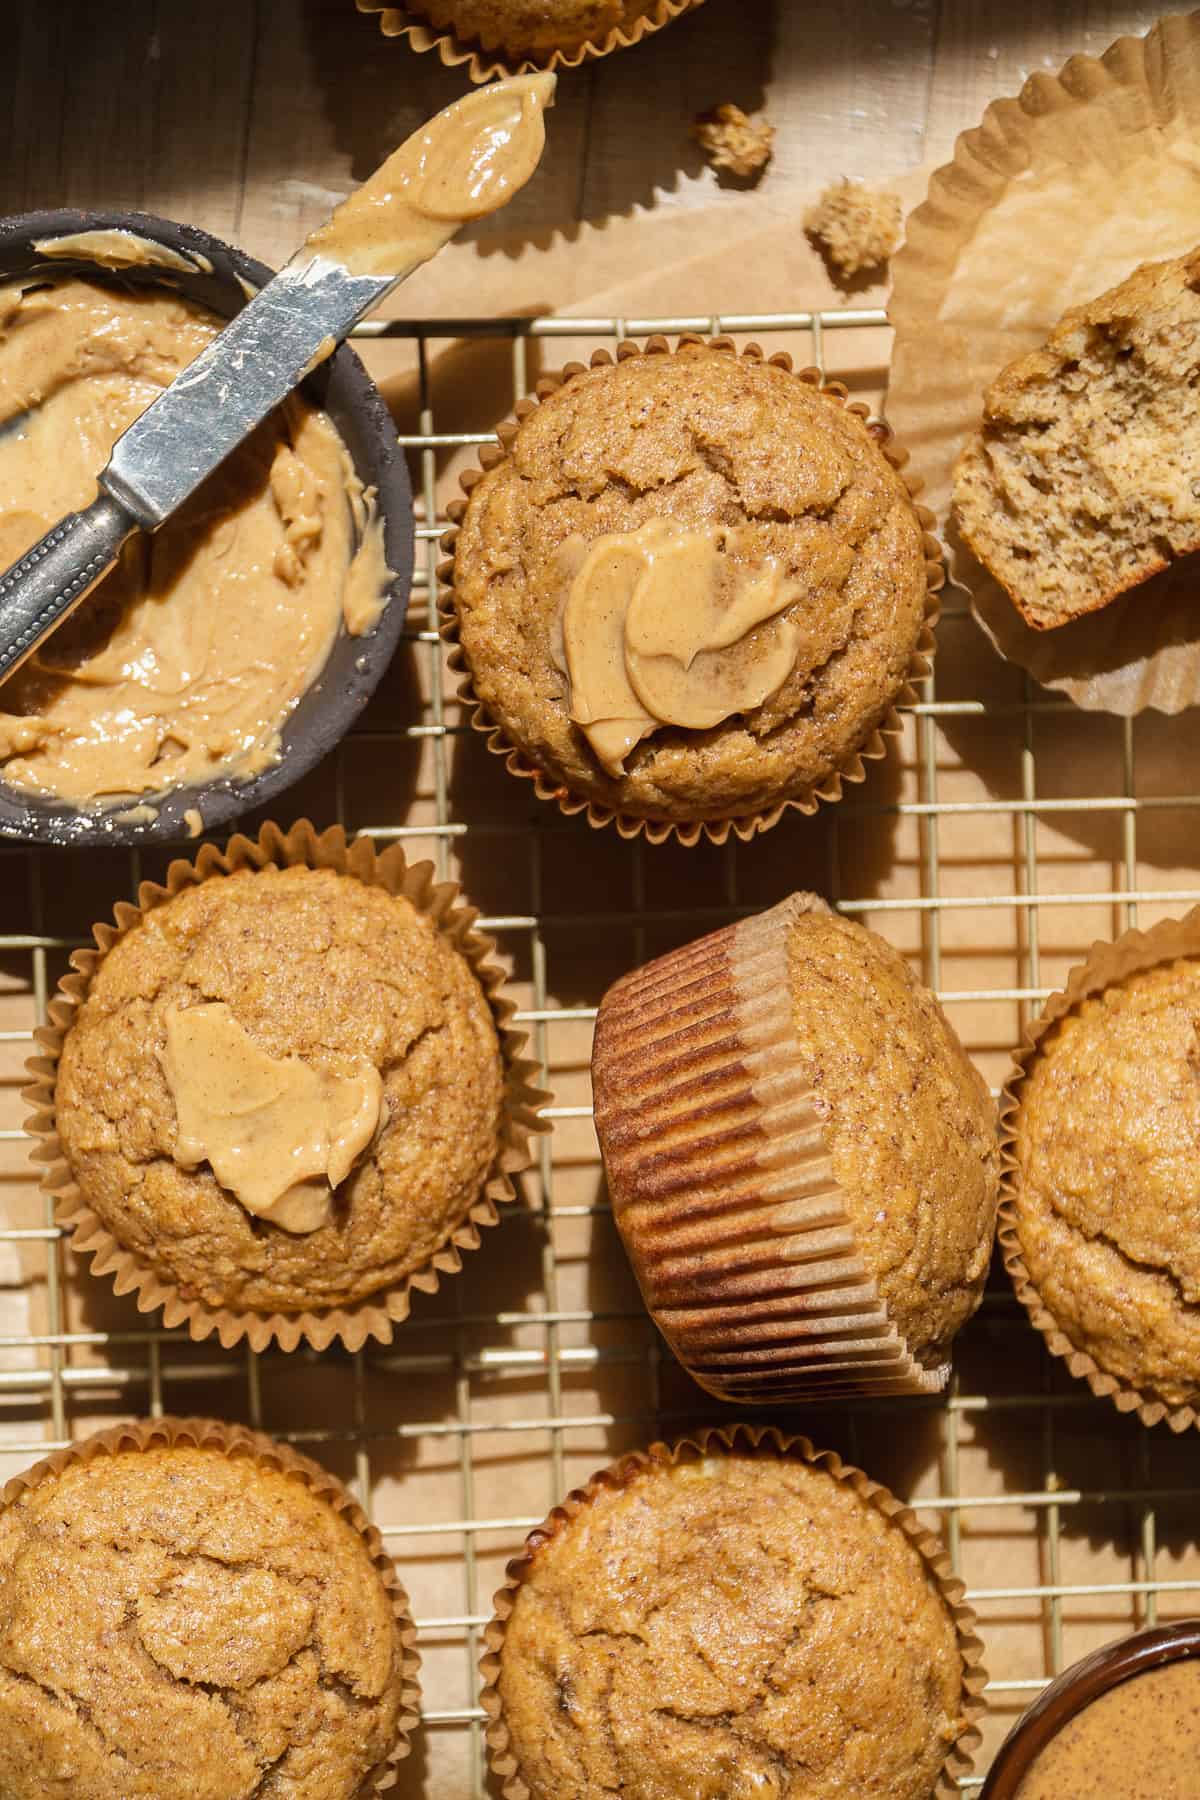 Banana almond flour muffins scattered on a cooling rack.